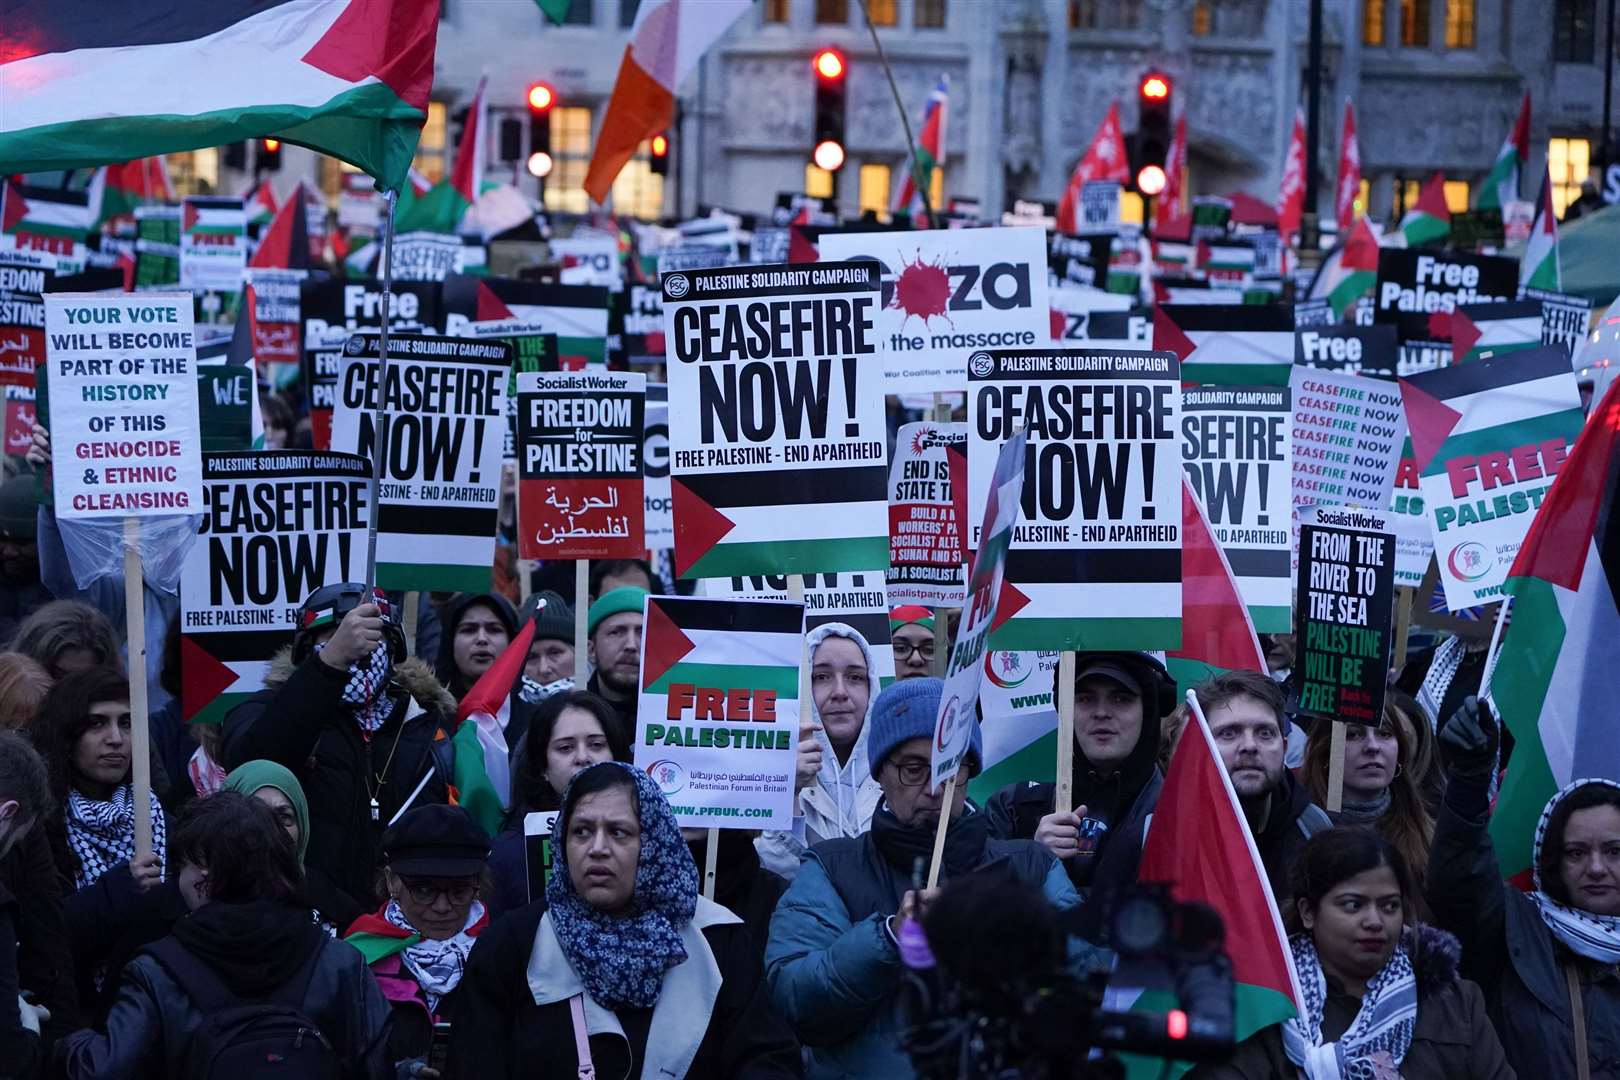 The Prime Minister had a message for those continuing to take part in pro-Palestine protests (Lucy North/PA)